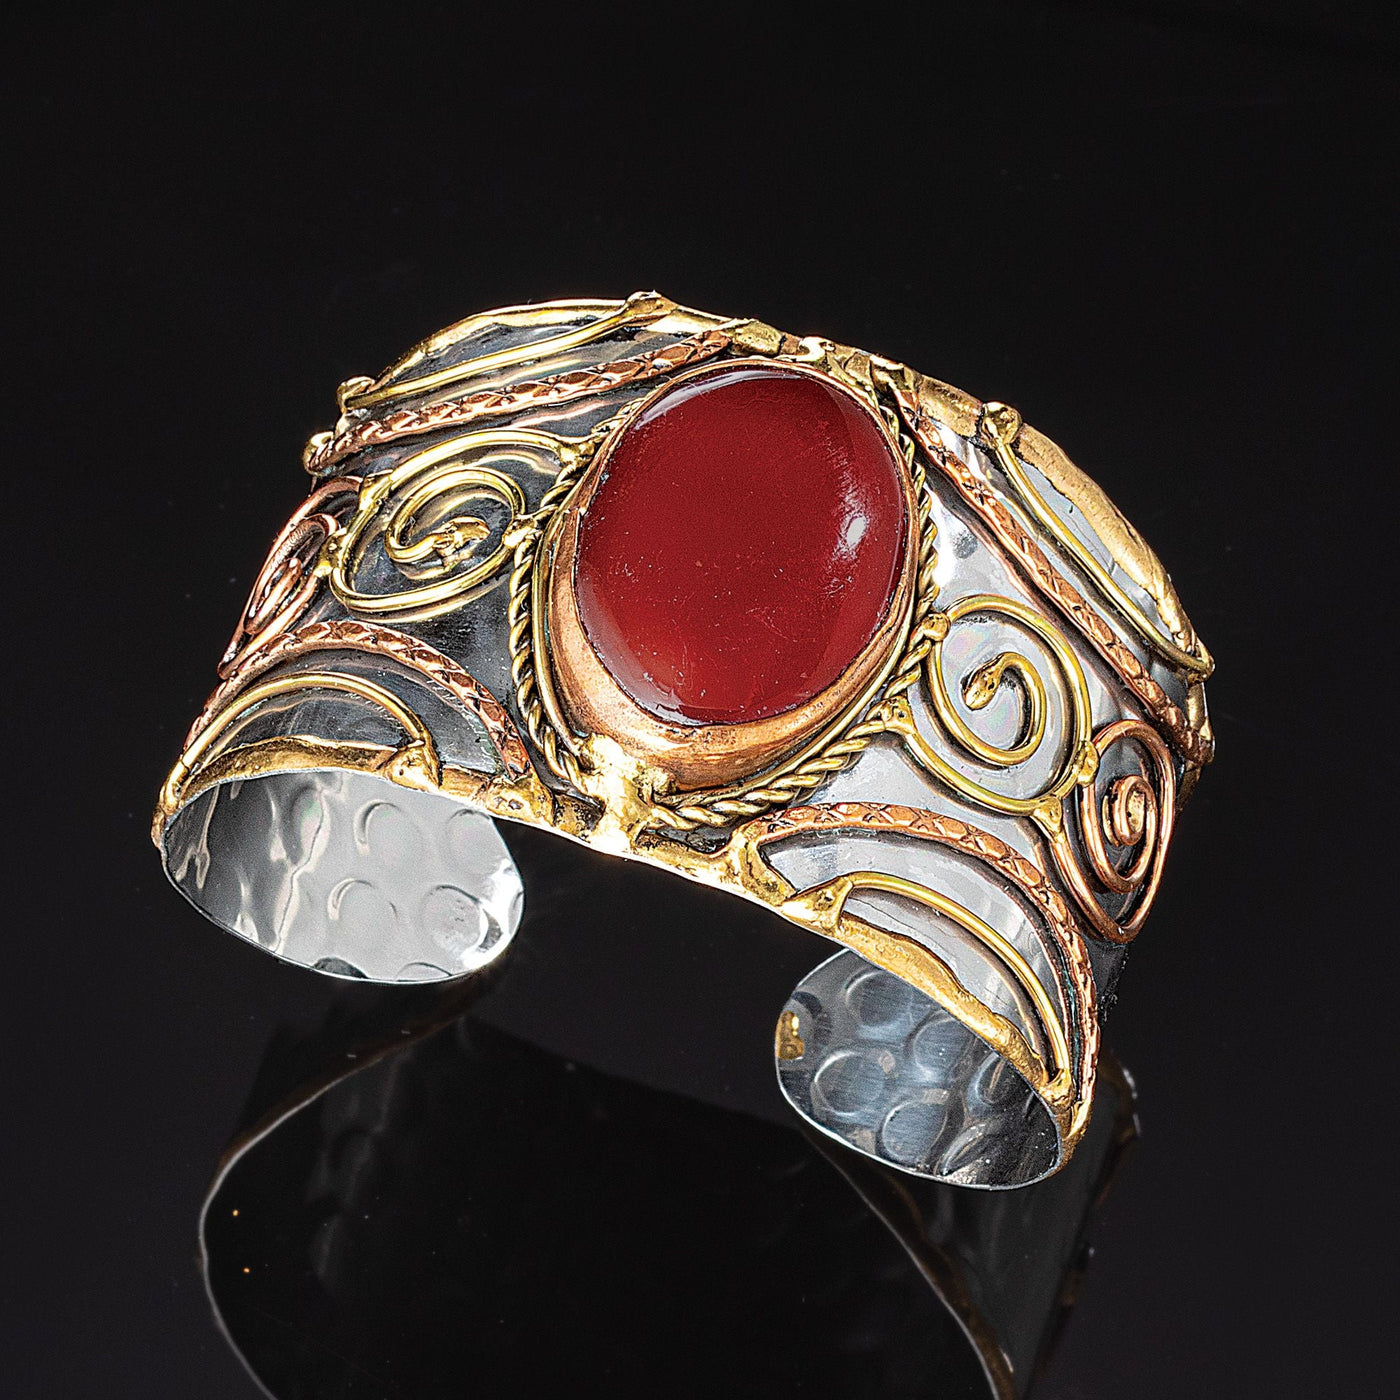 Mixed Metal & Red Onyx Cuff